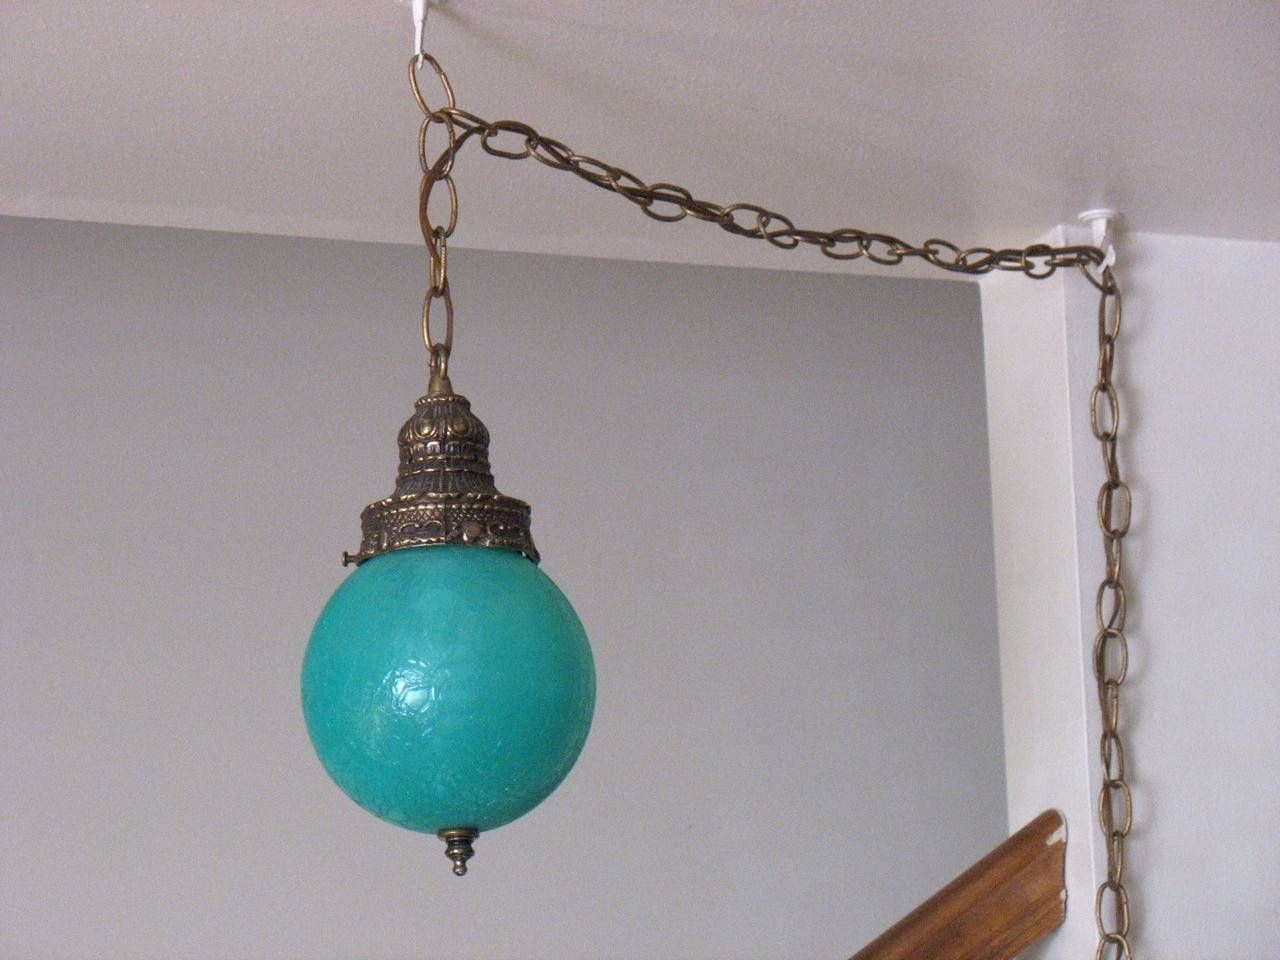 Trend Pendant Light Chain 26 About Remodel Ceiling Light Pull Pertaining To Pull Chain Pendant Lights (View 15 of 15)